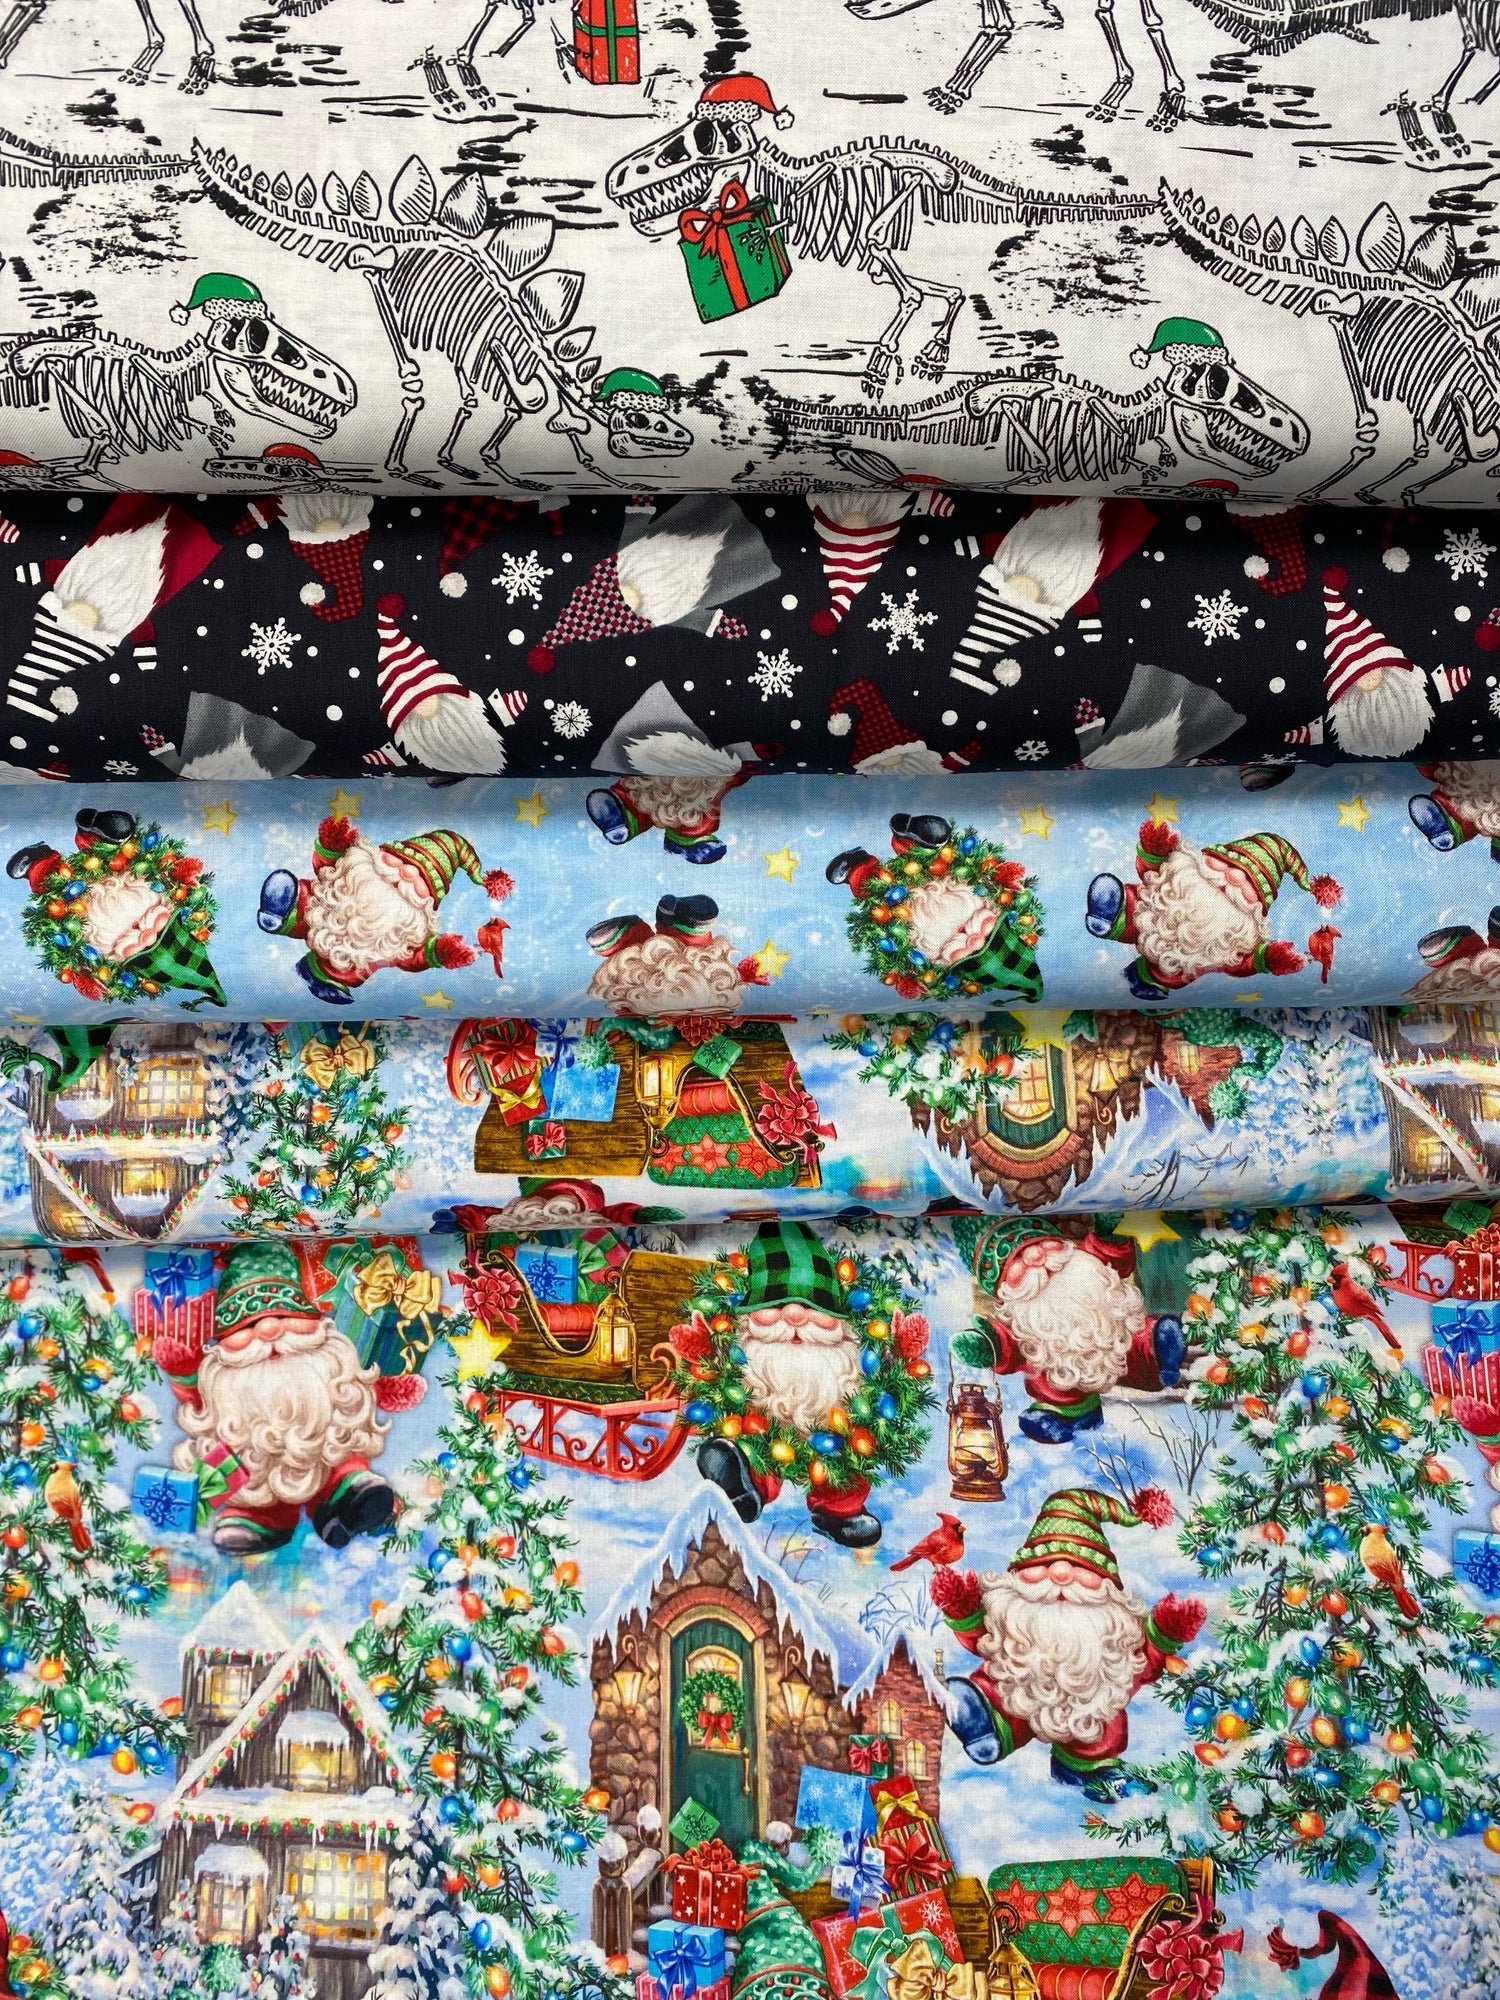 Timeless Treasures Home Is Where My Honey Is Beekeeper Gnomes Fabric